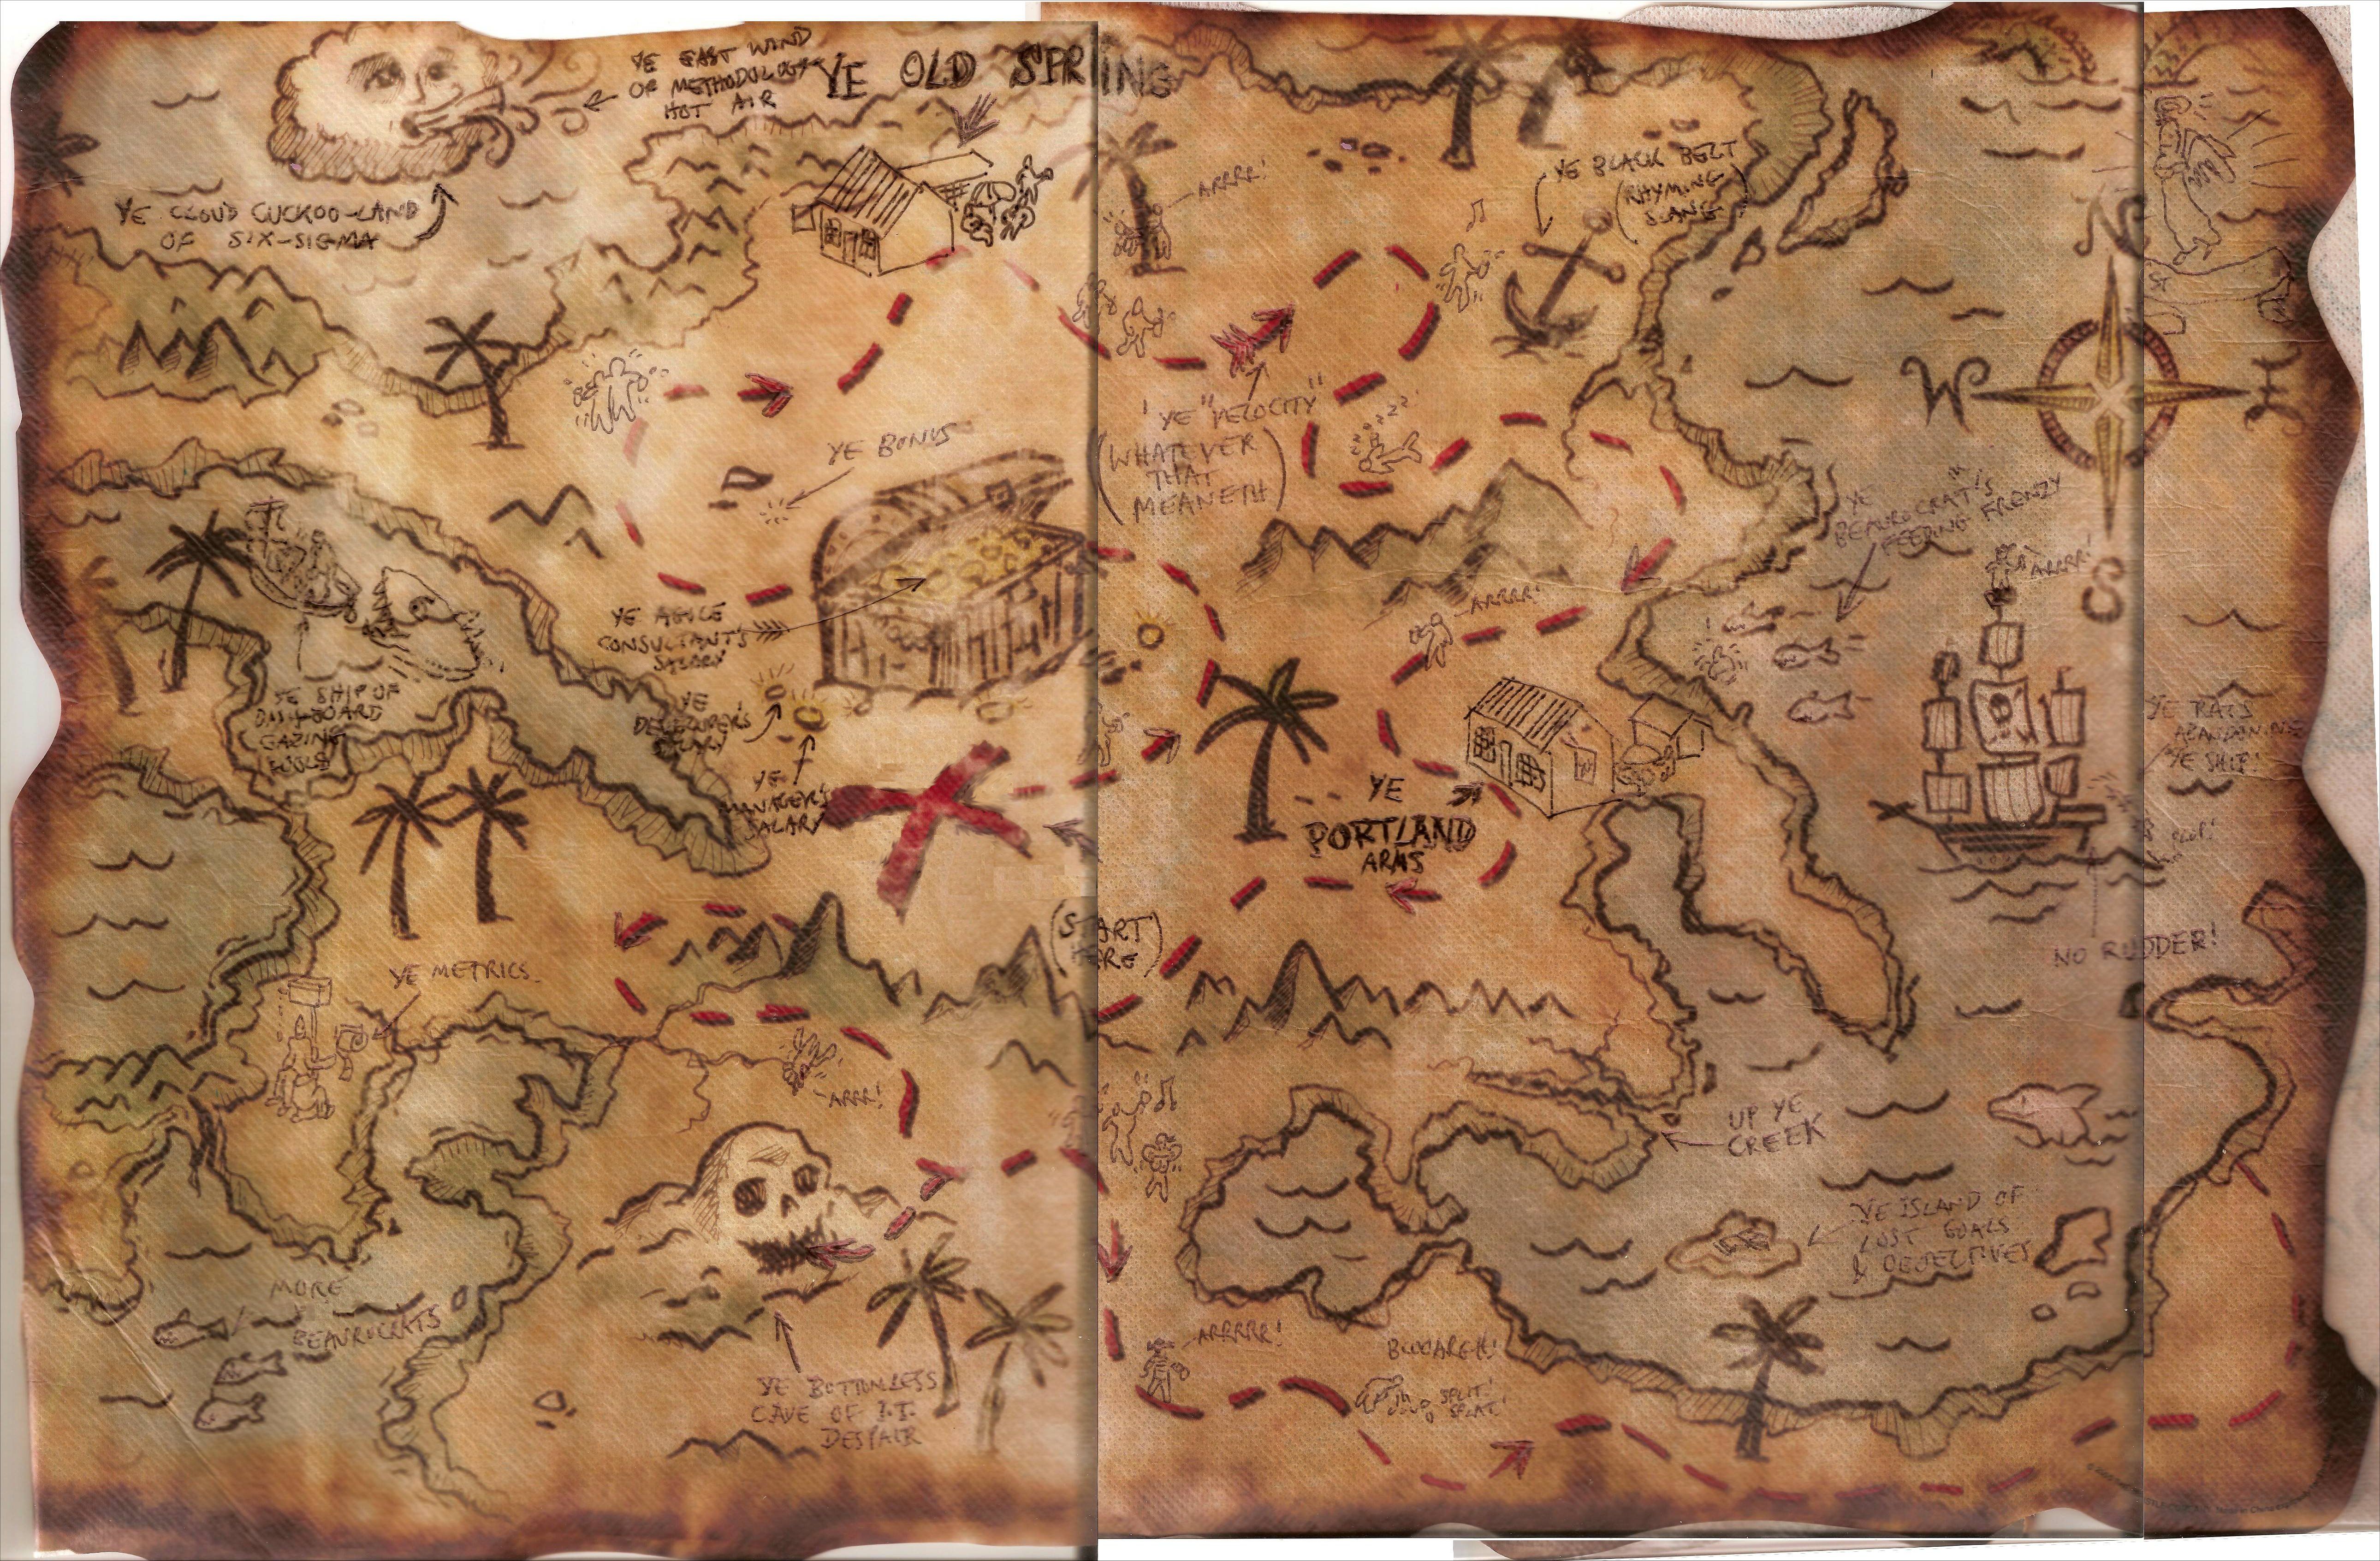 Free Pirate Map, Download Free Pirate Map png image, Free ClipArts on Clipart Library